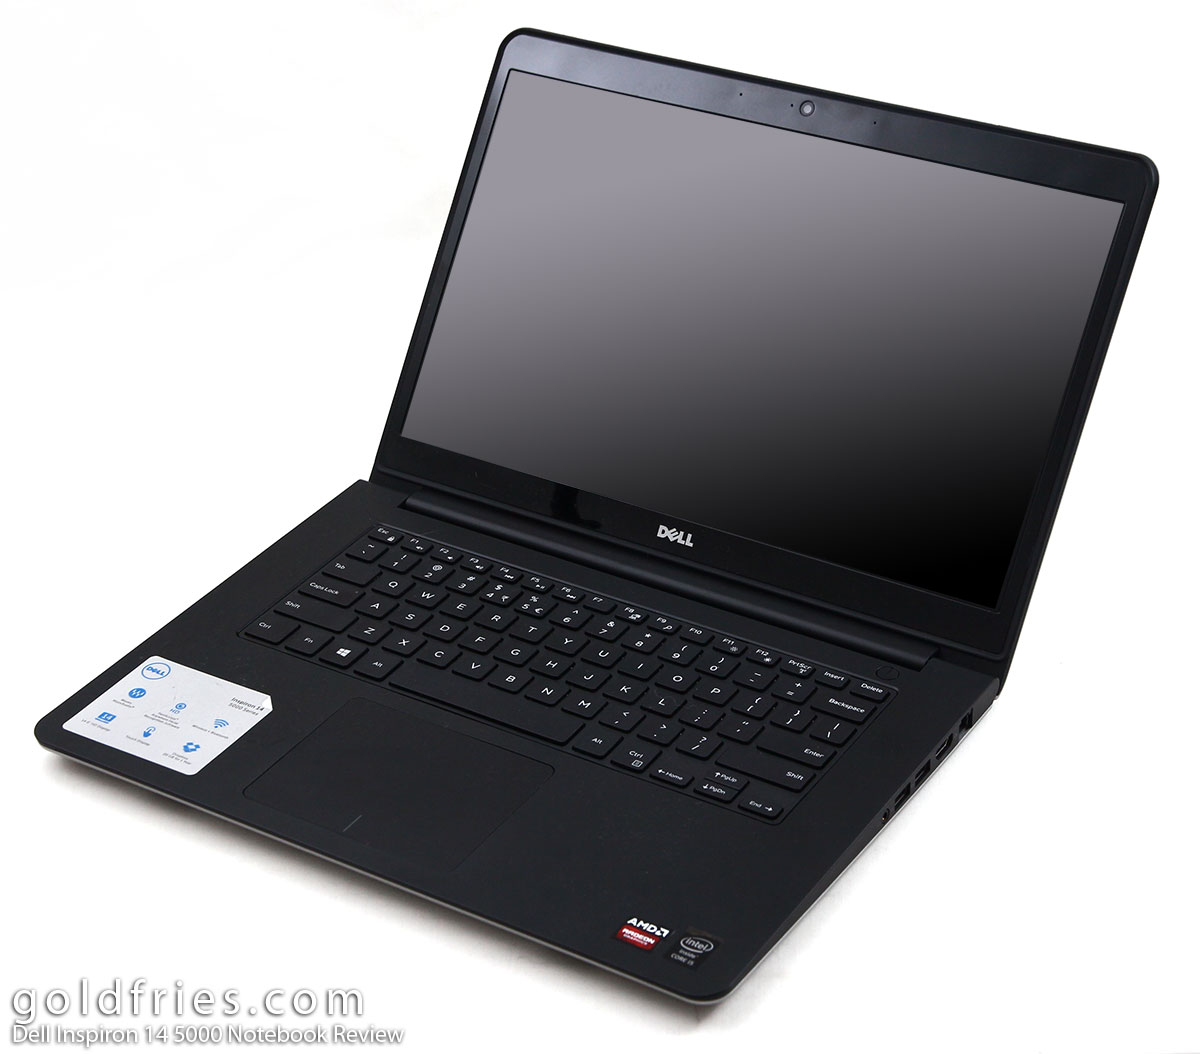 Dell Inspiron 14 5000 Notebook Review ~ goldfries